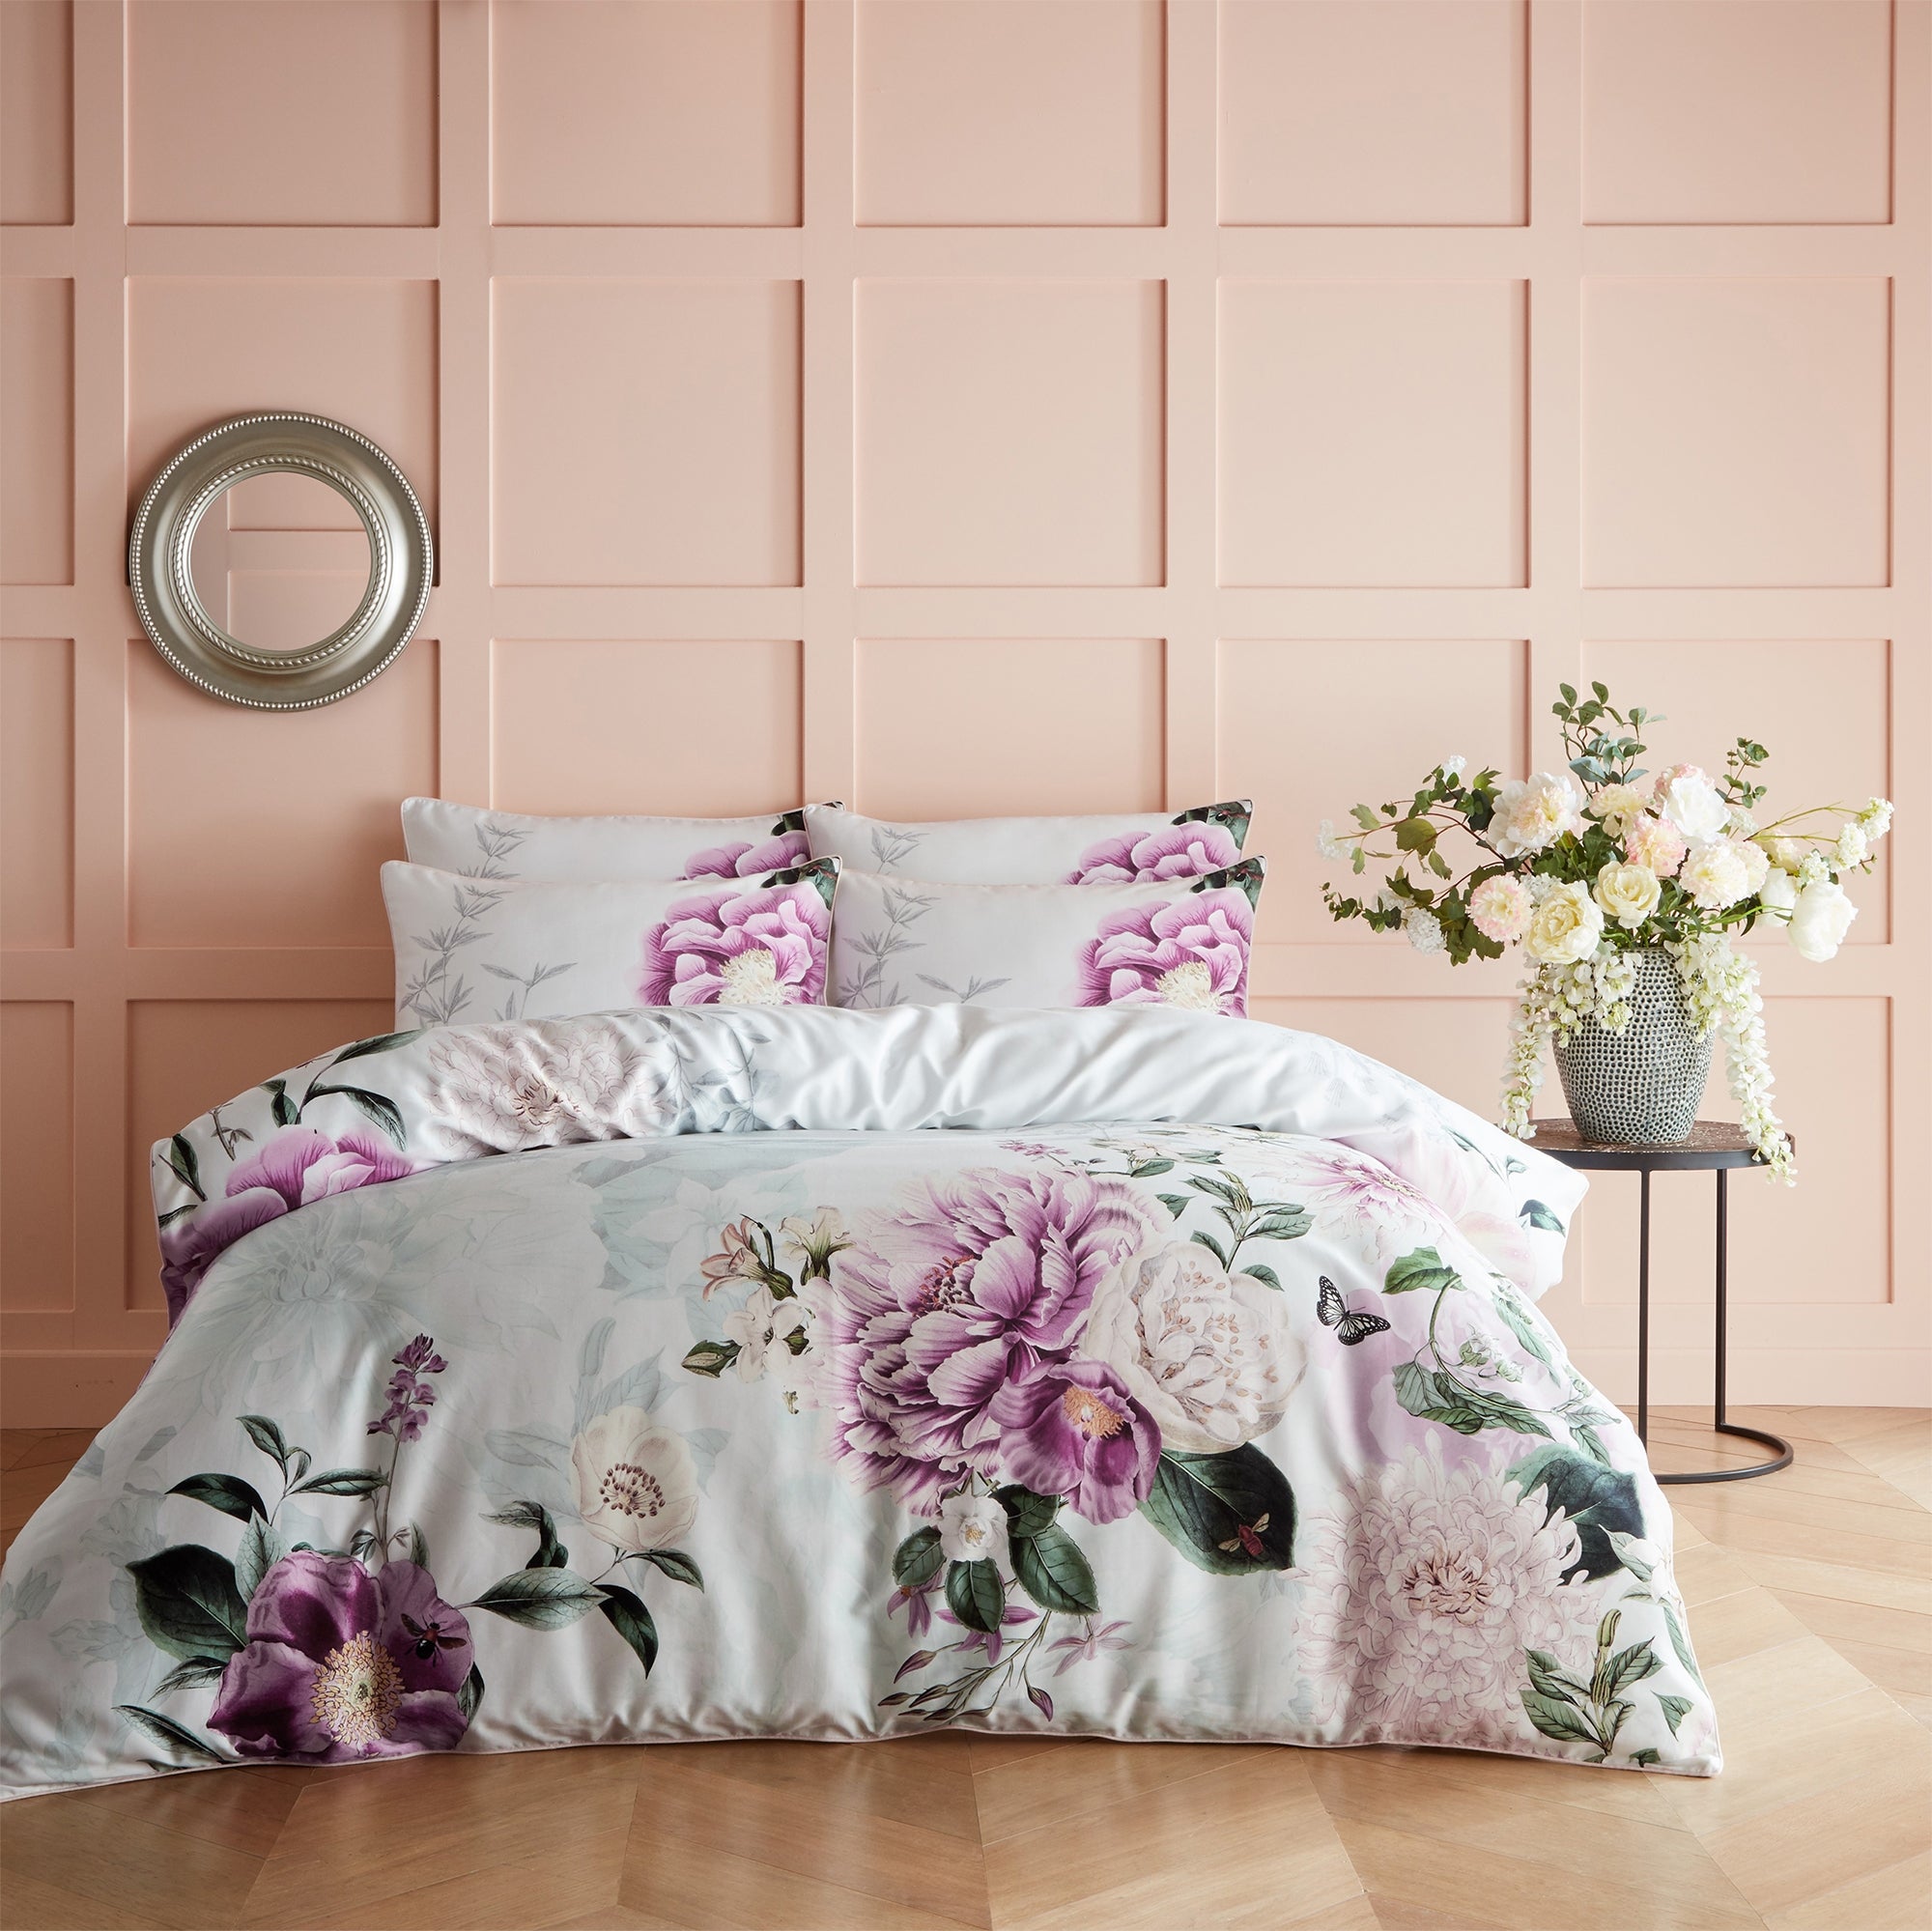 Paoletti Krista 100 Cotton Duvet Cover And Pillowcase Set Pink